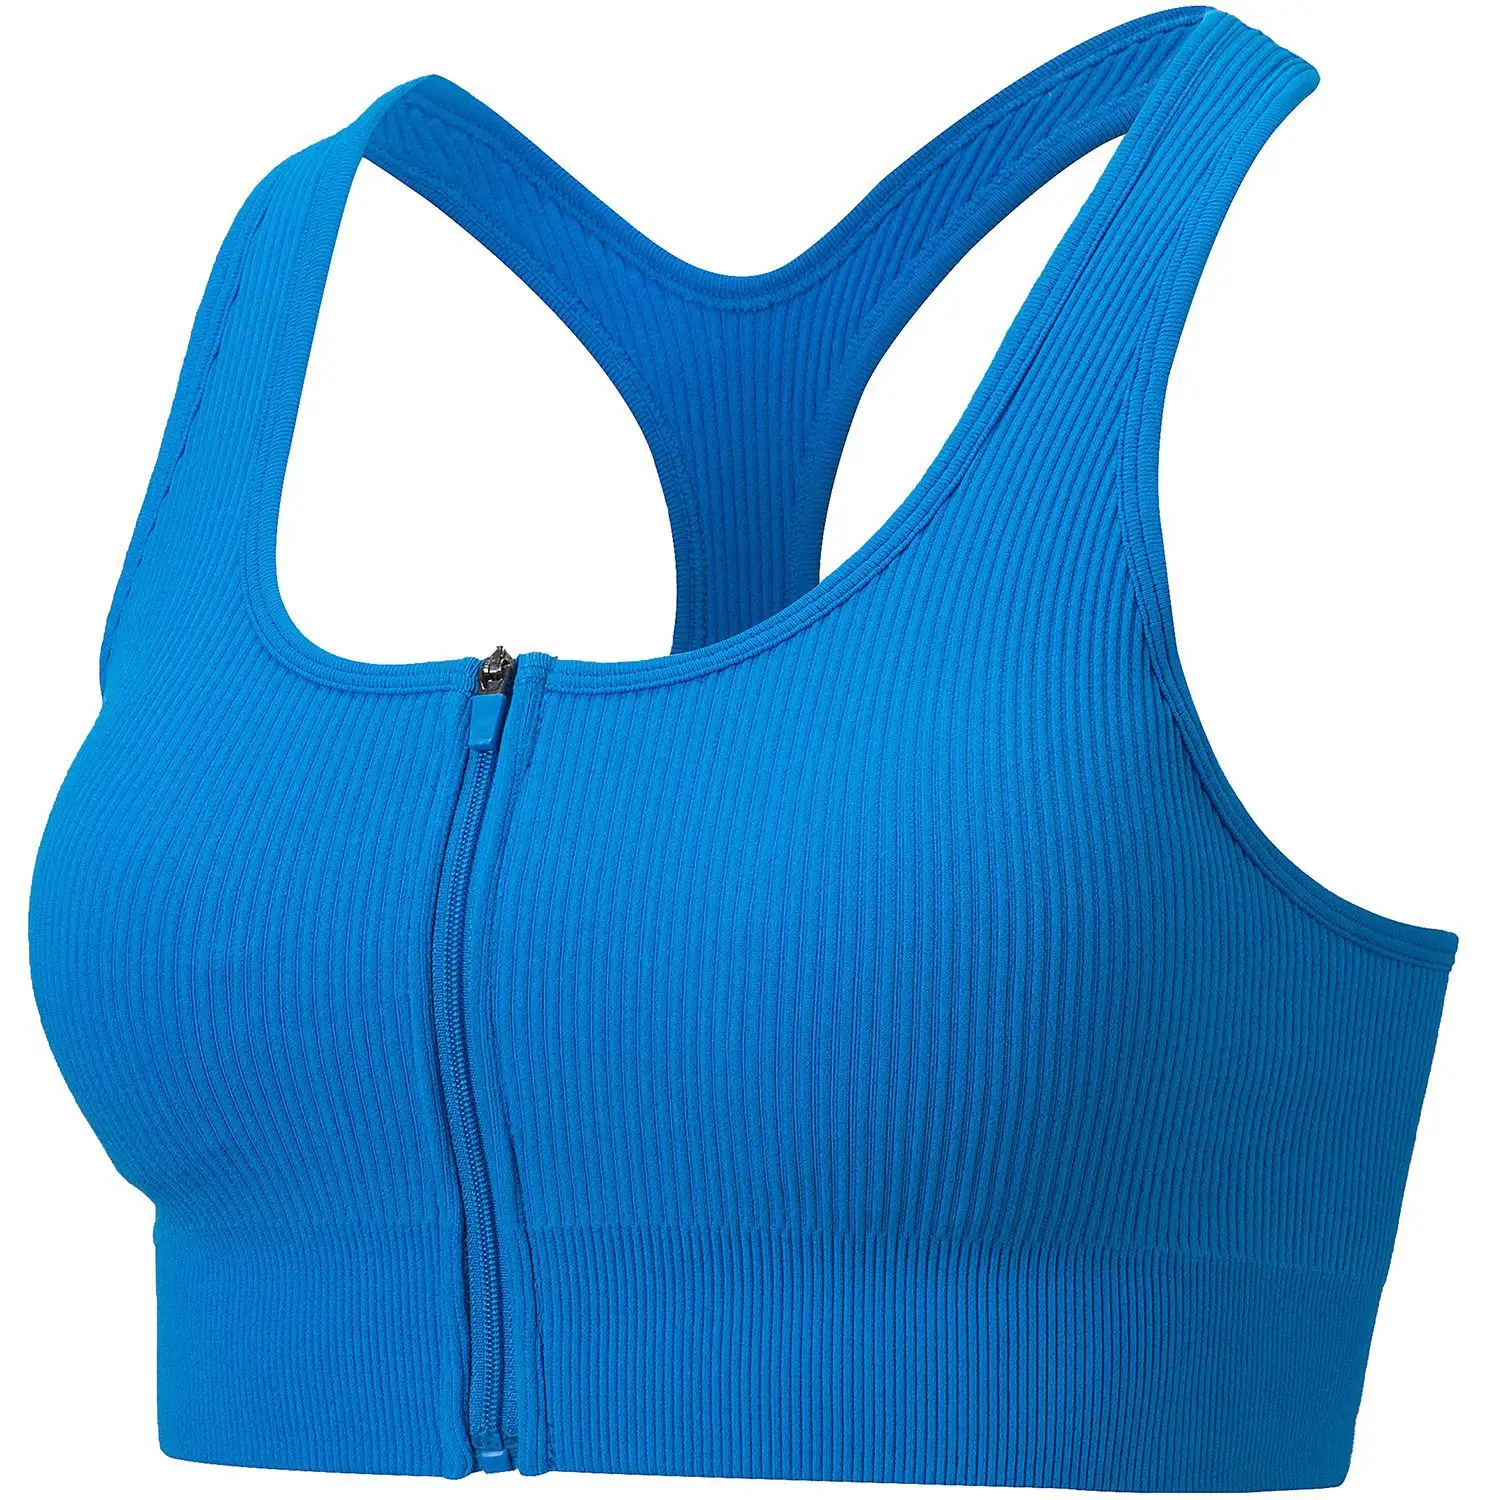 Wholesale Workout new style Clothing Sports Women Fitness top New Gym Yoga top Wear wholesale yoga top Front zip sports bra